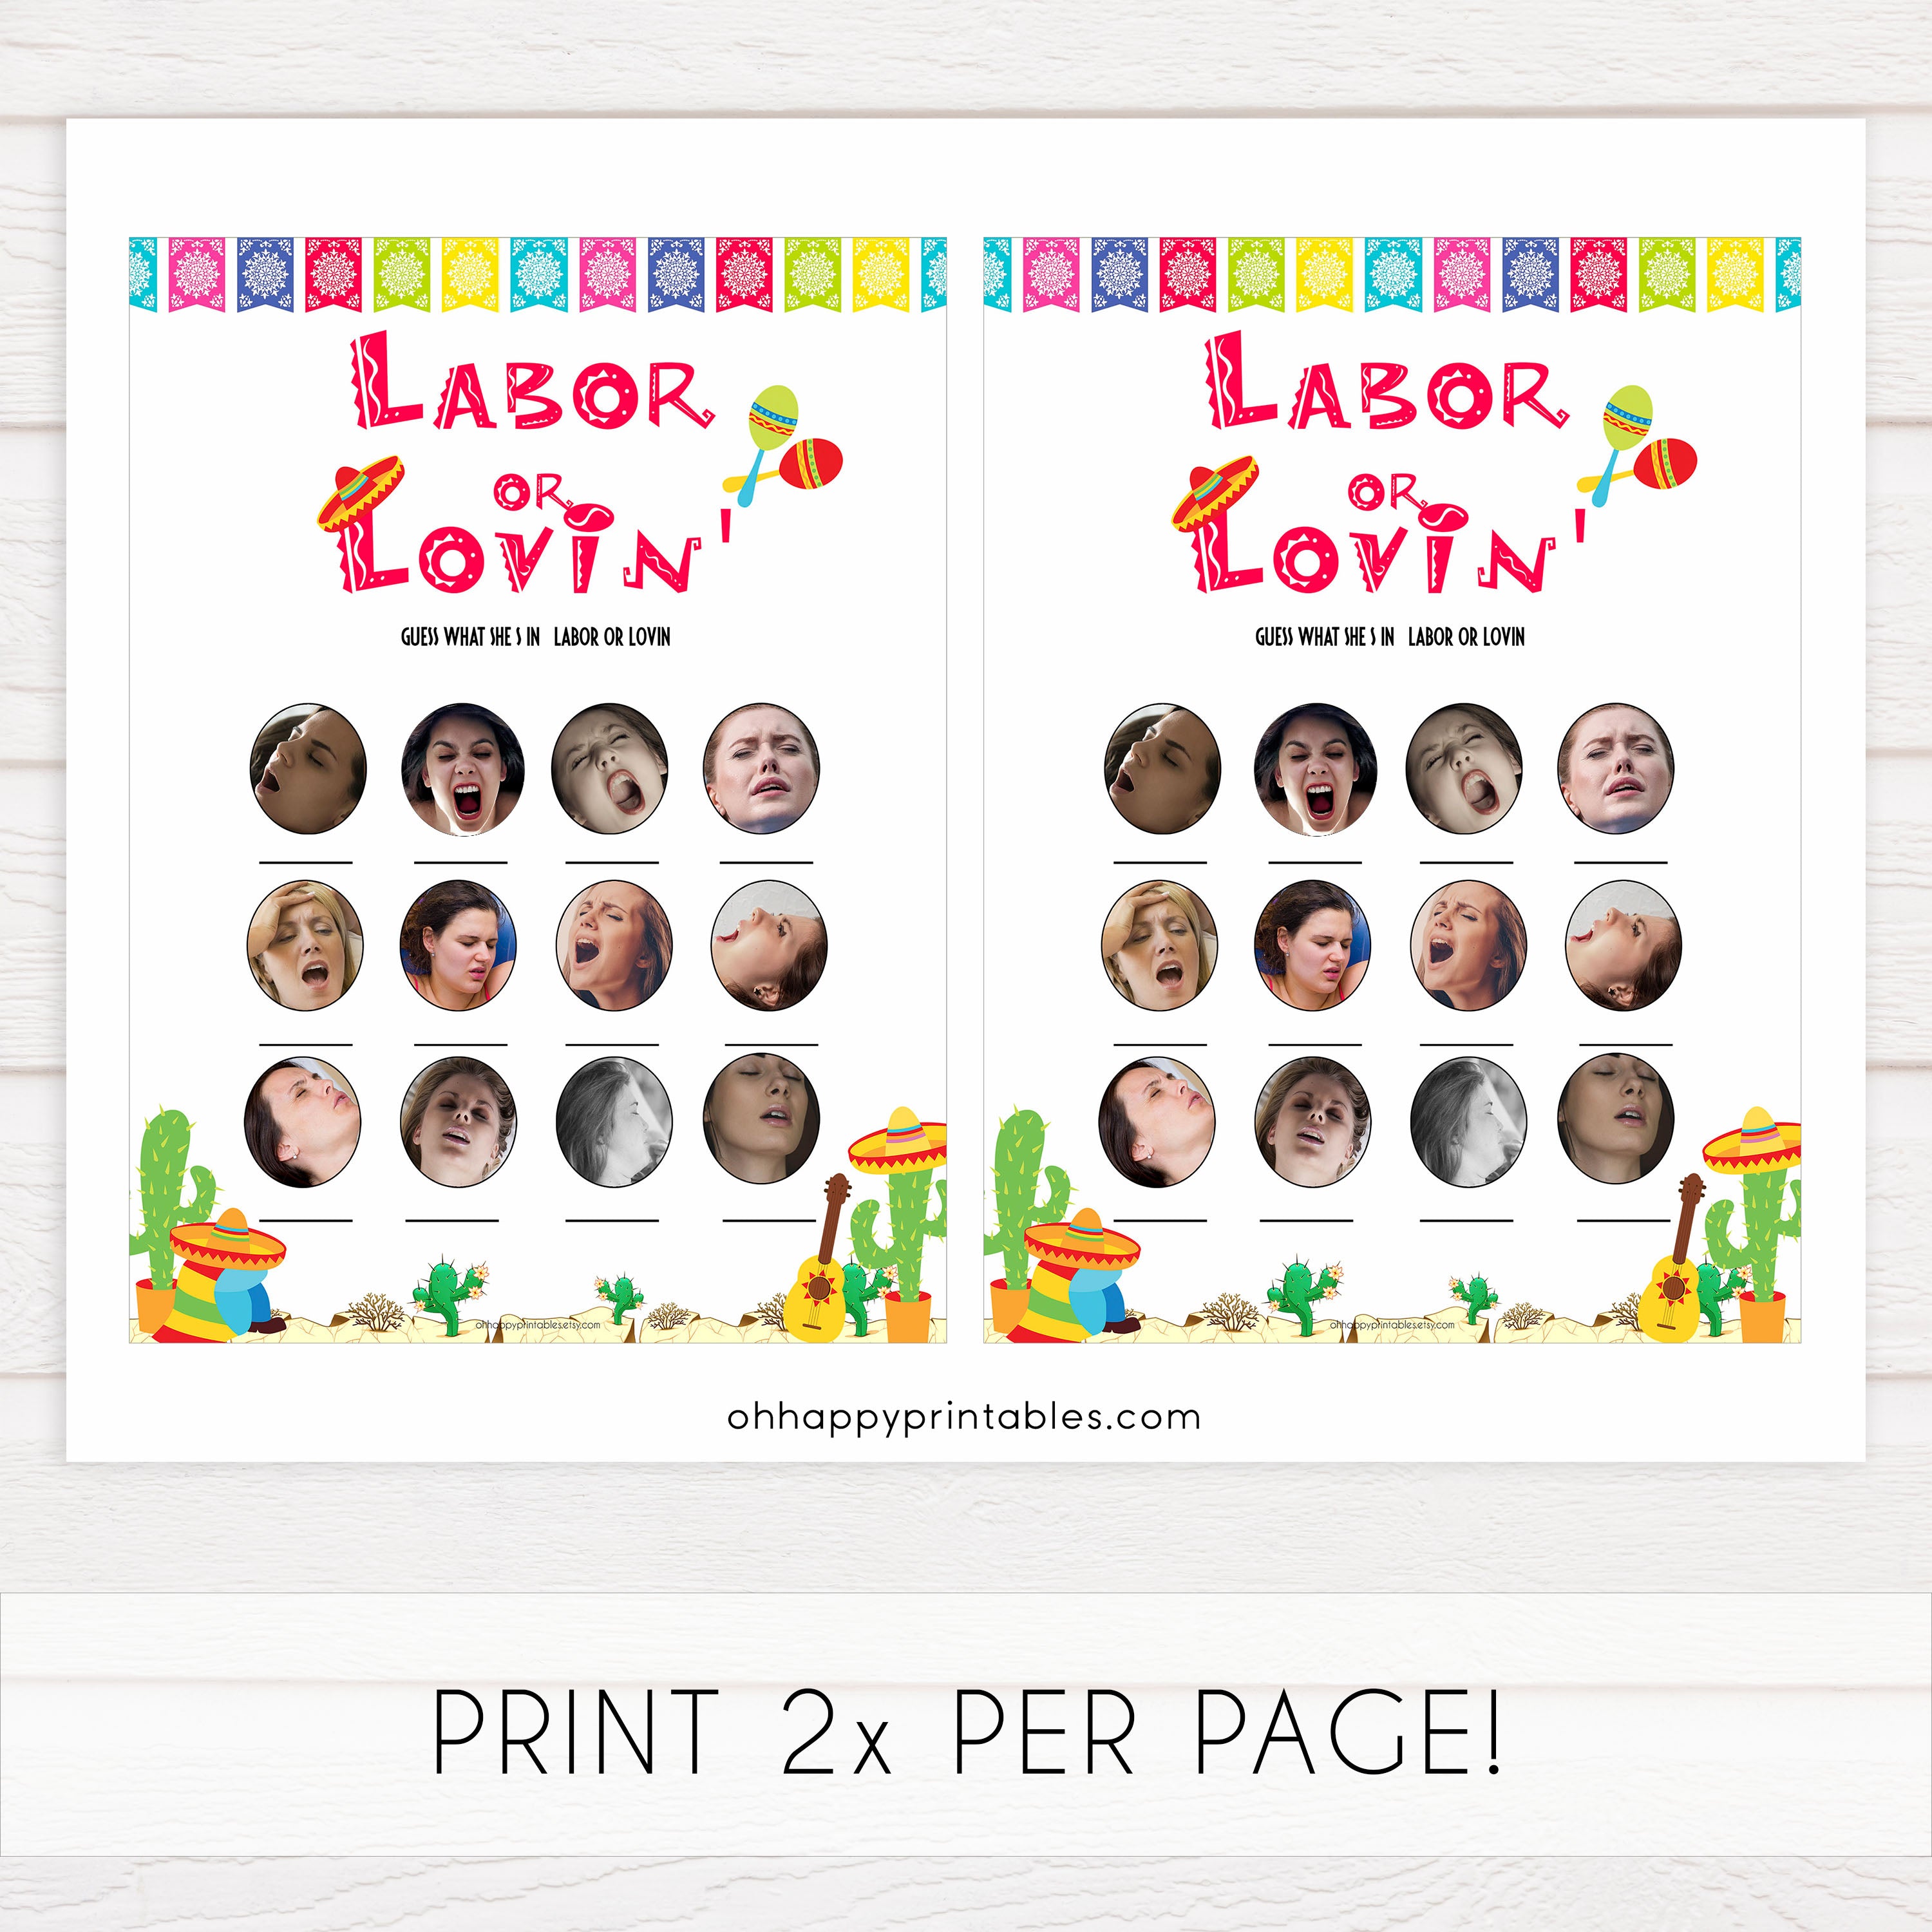 labour or lovin, labor or lovin game, Printable baby shower games, Mexican fiesta fun baby games, baby shower games, fun baby shower ideas, top baby shower ideas, fiesta shower baby shower, fiesta baby shower ideas